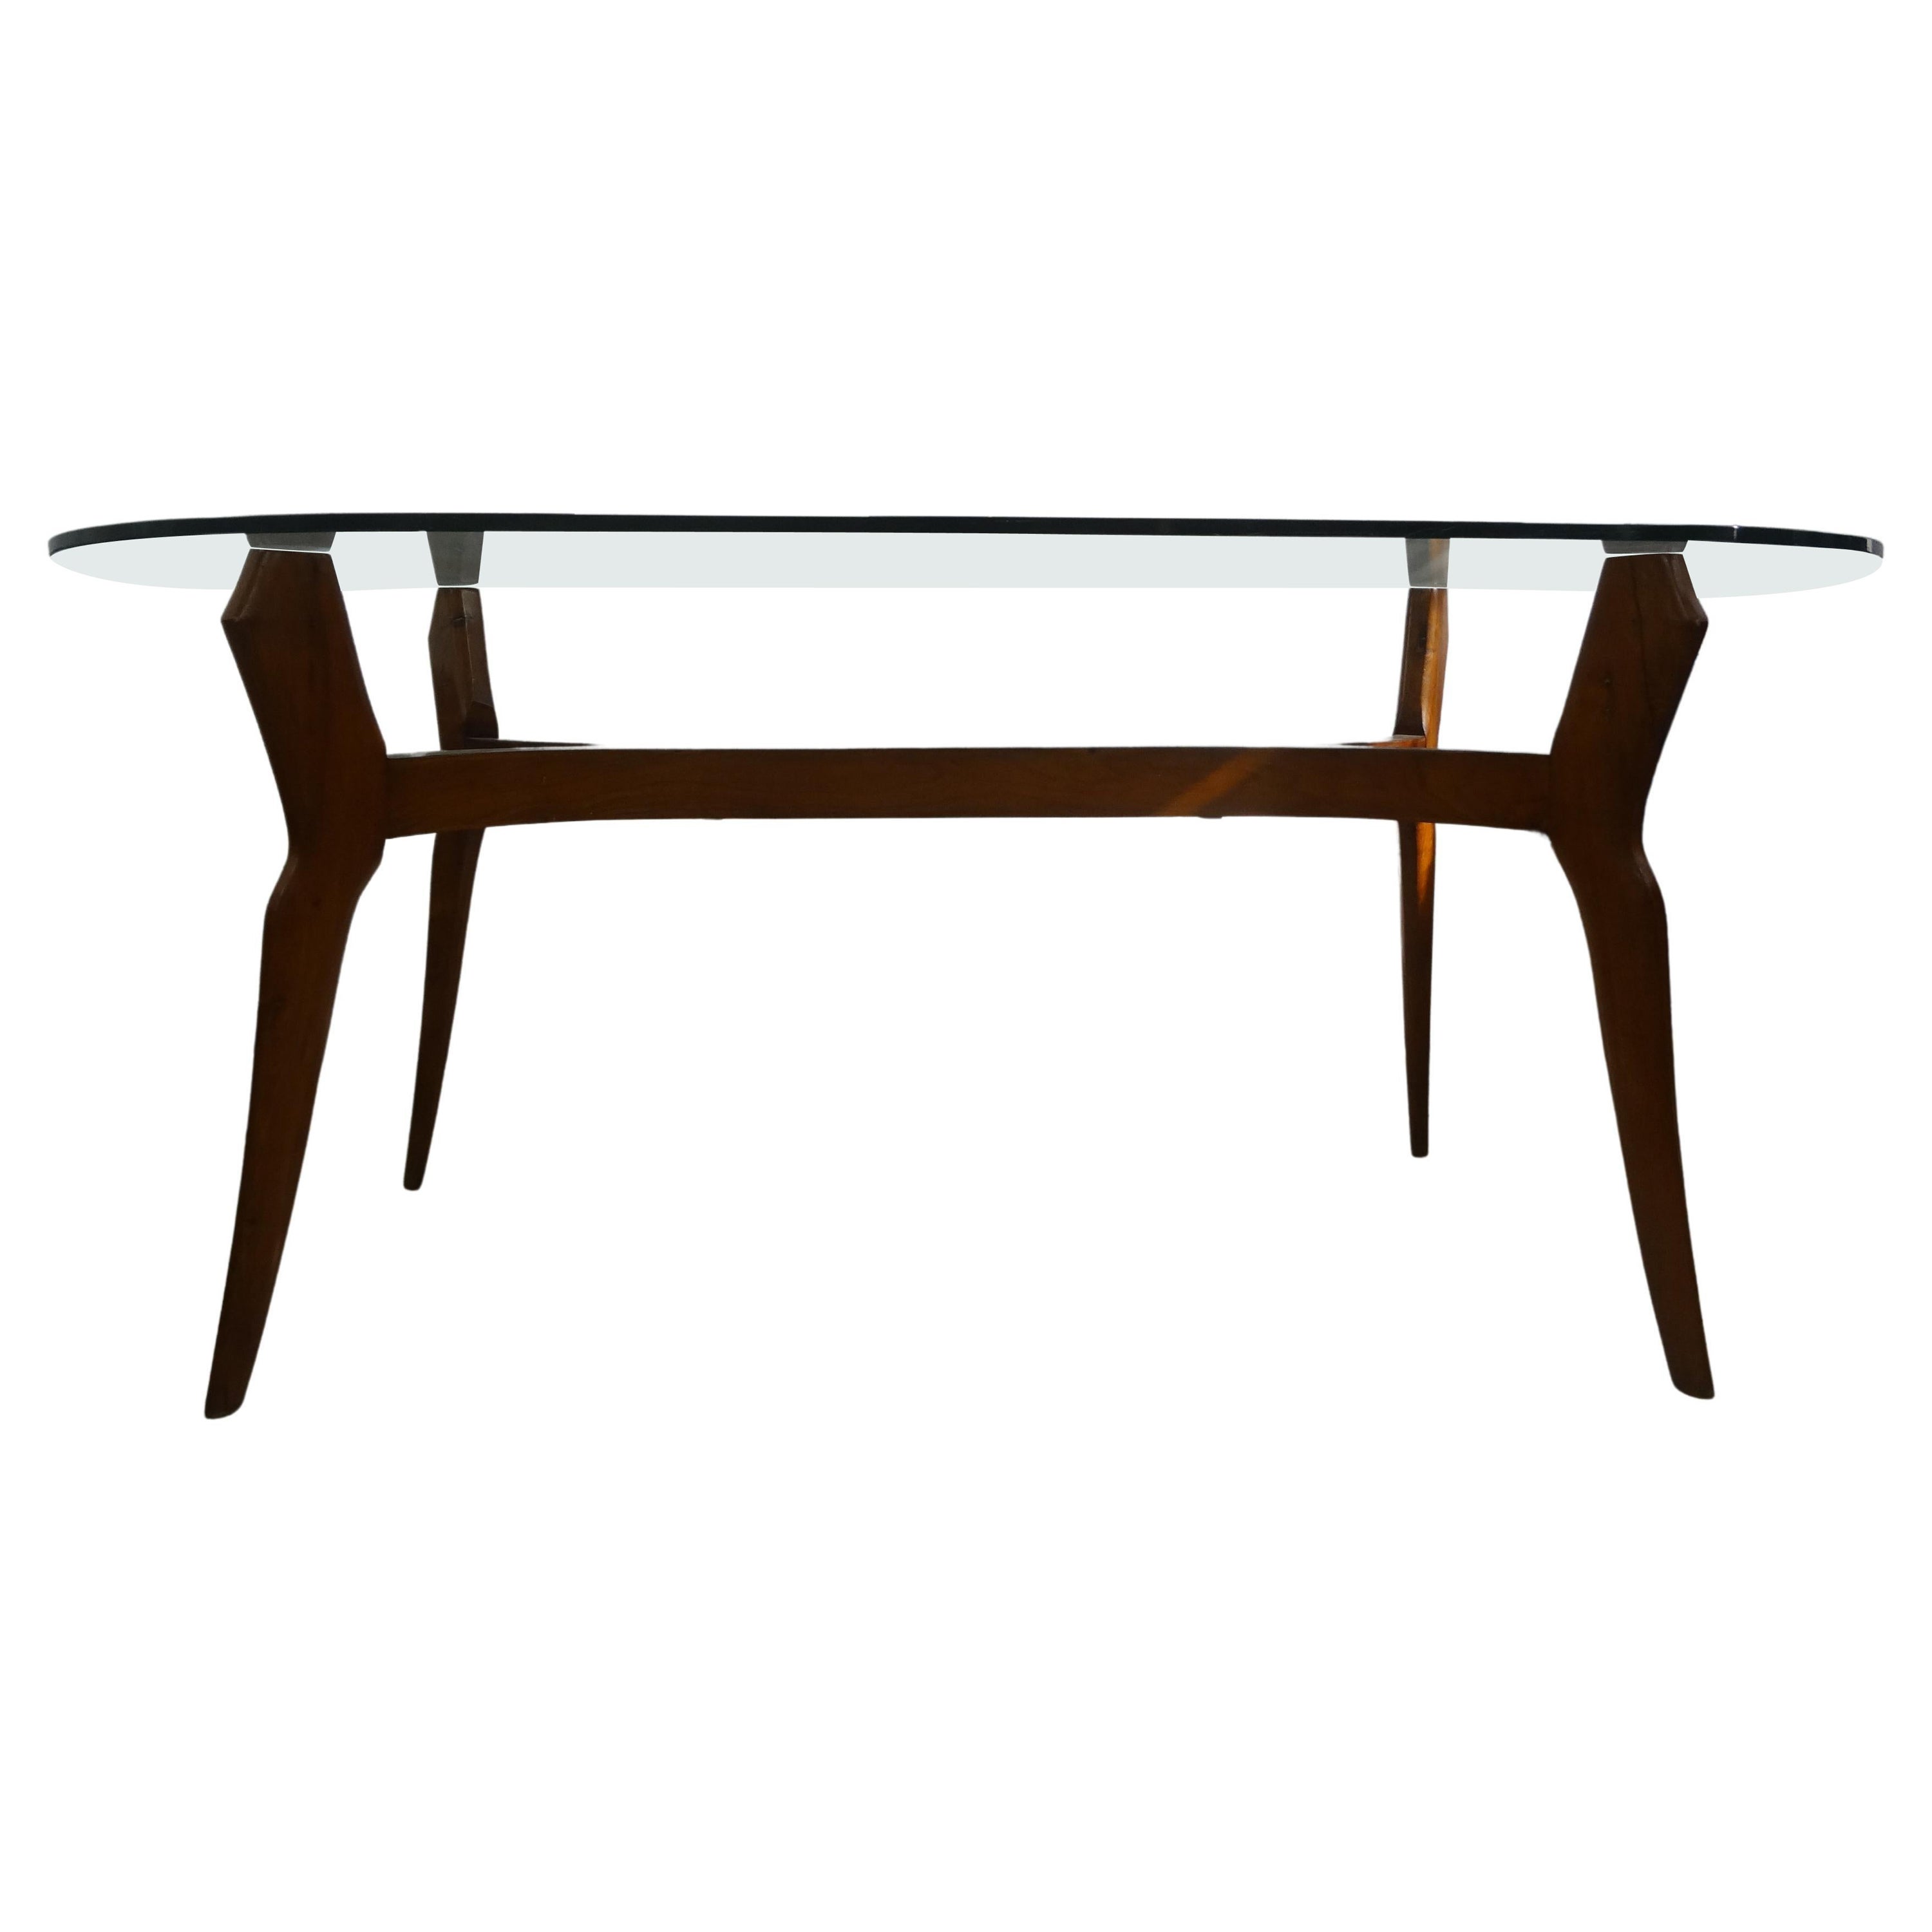 Italian Modern Sculptural Dining Table With Glass Top